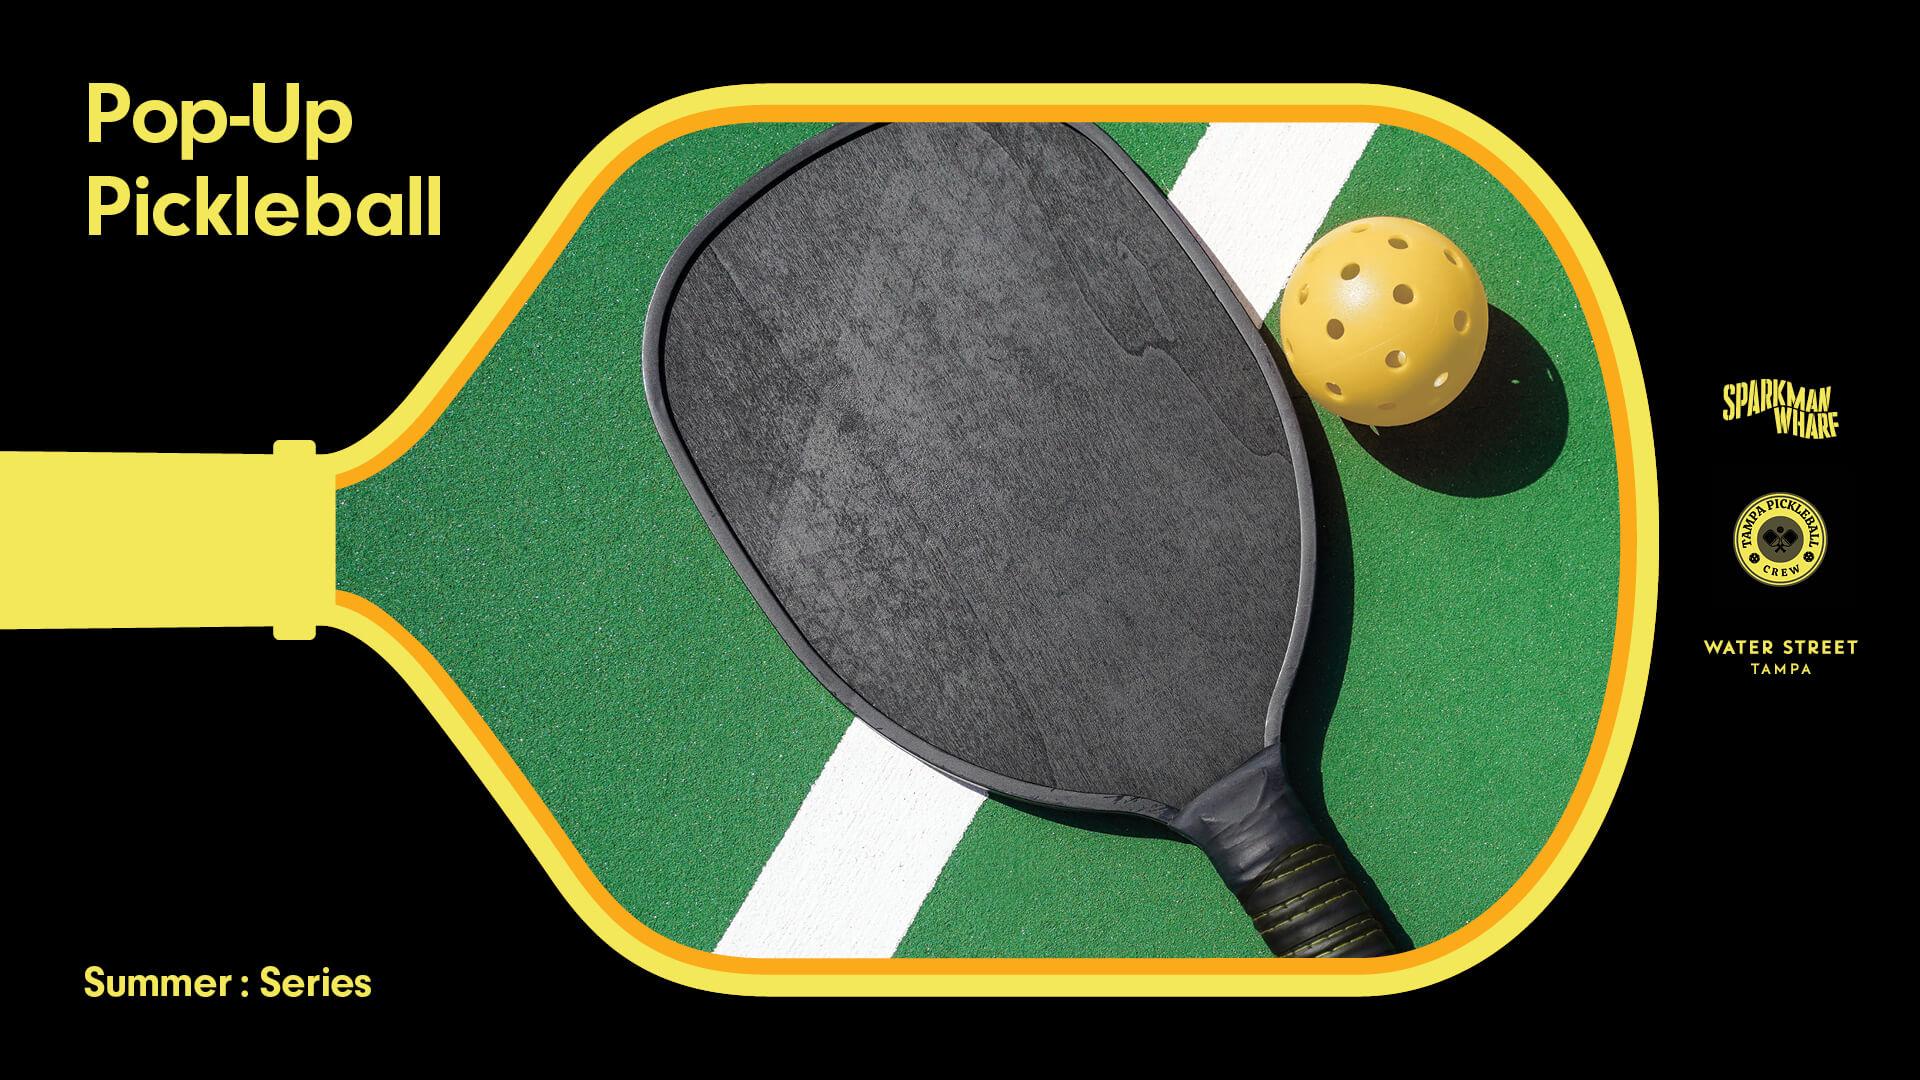 a paddle on a pickleball court event graphics